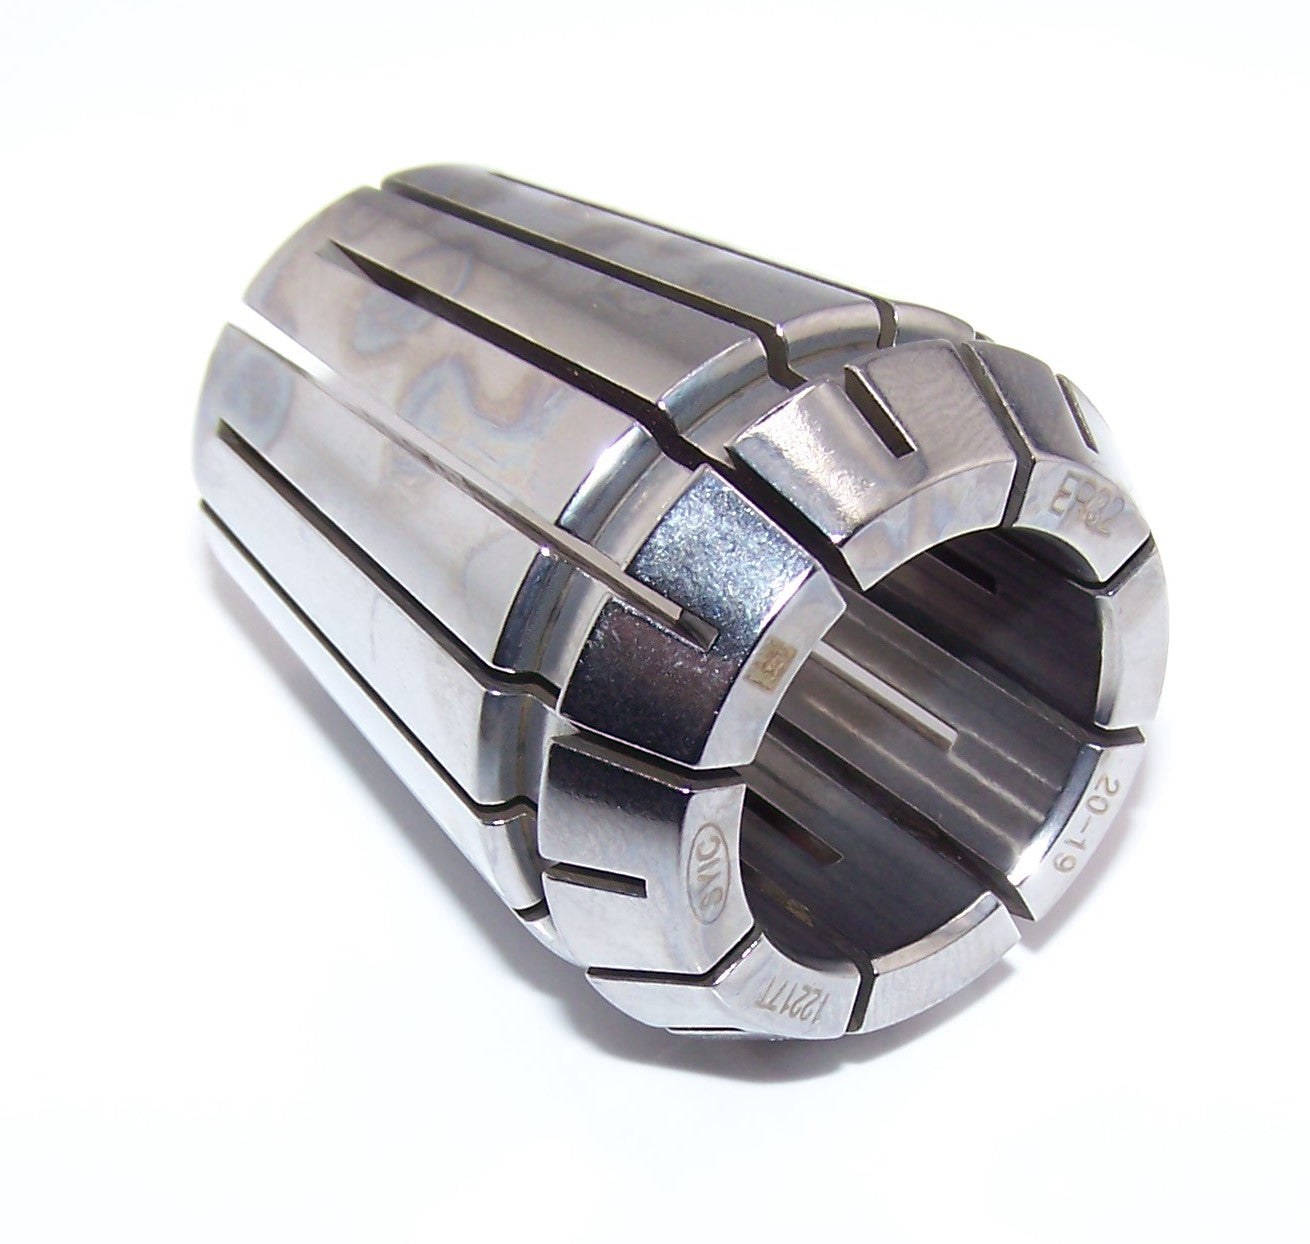 ER32 PRECISION COLLET 20mm from Techniks